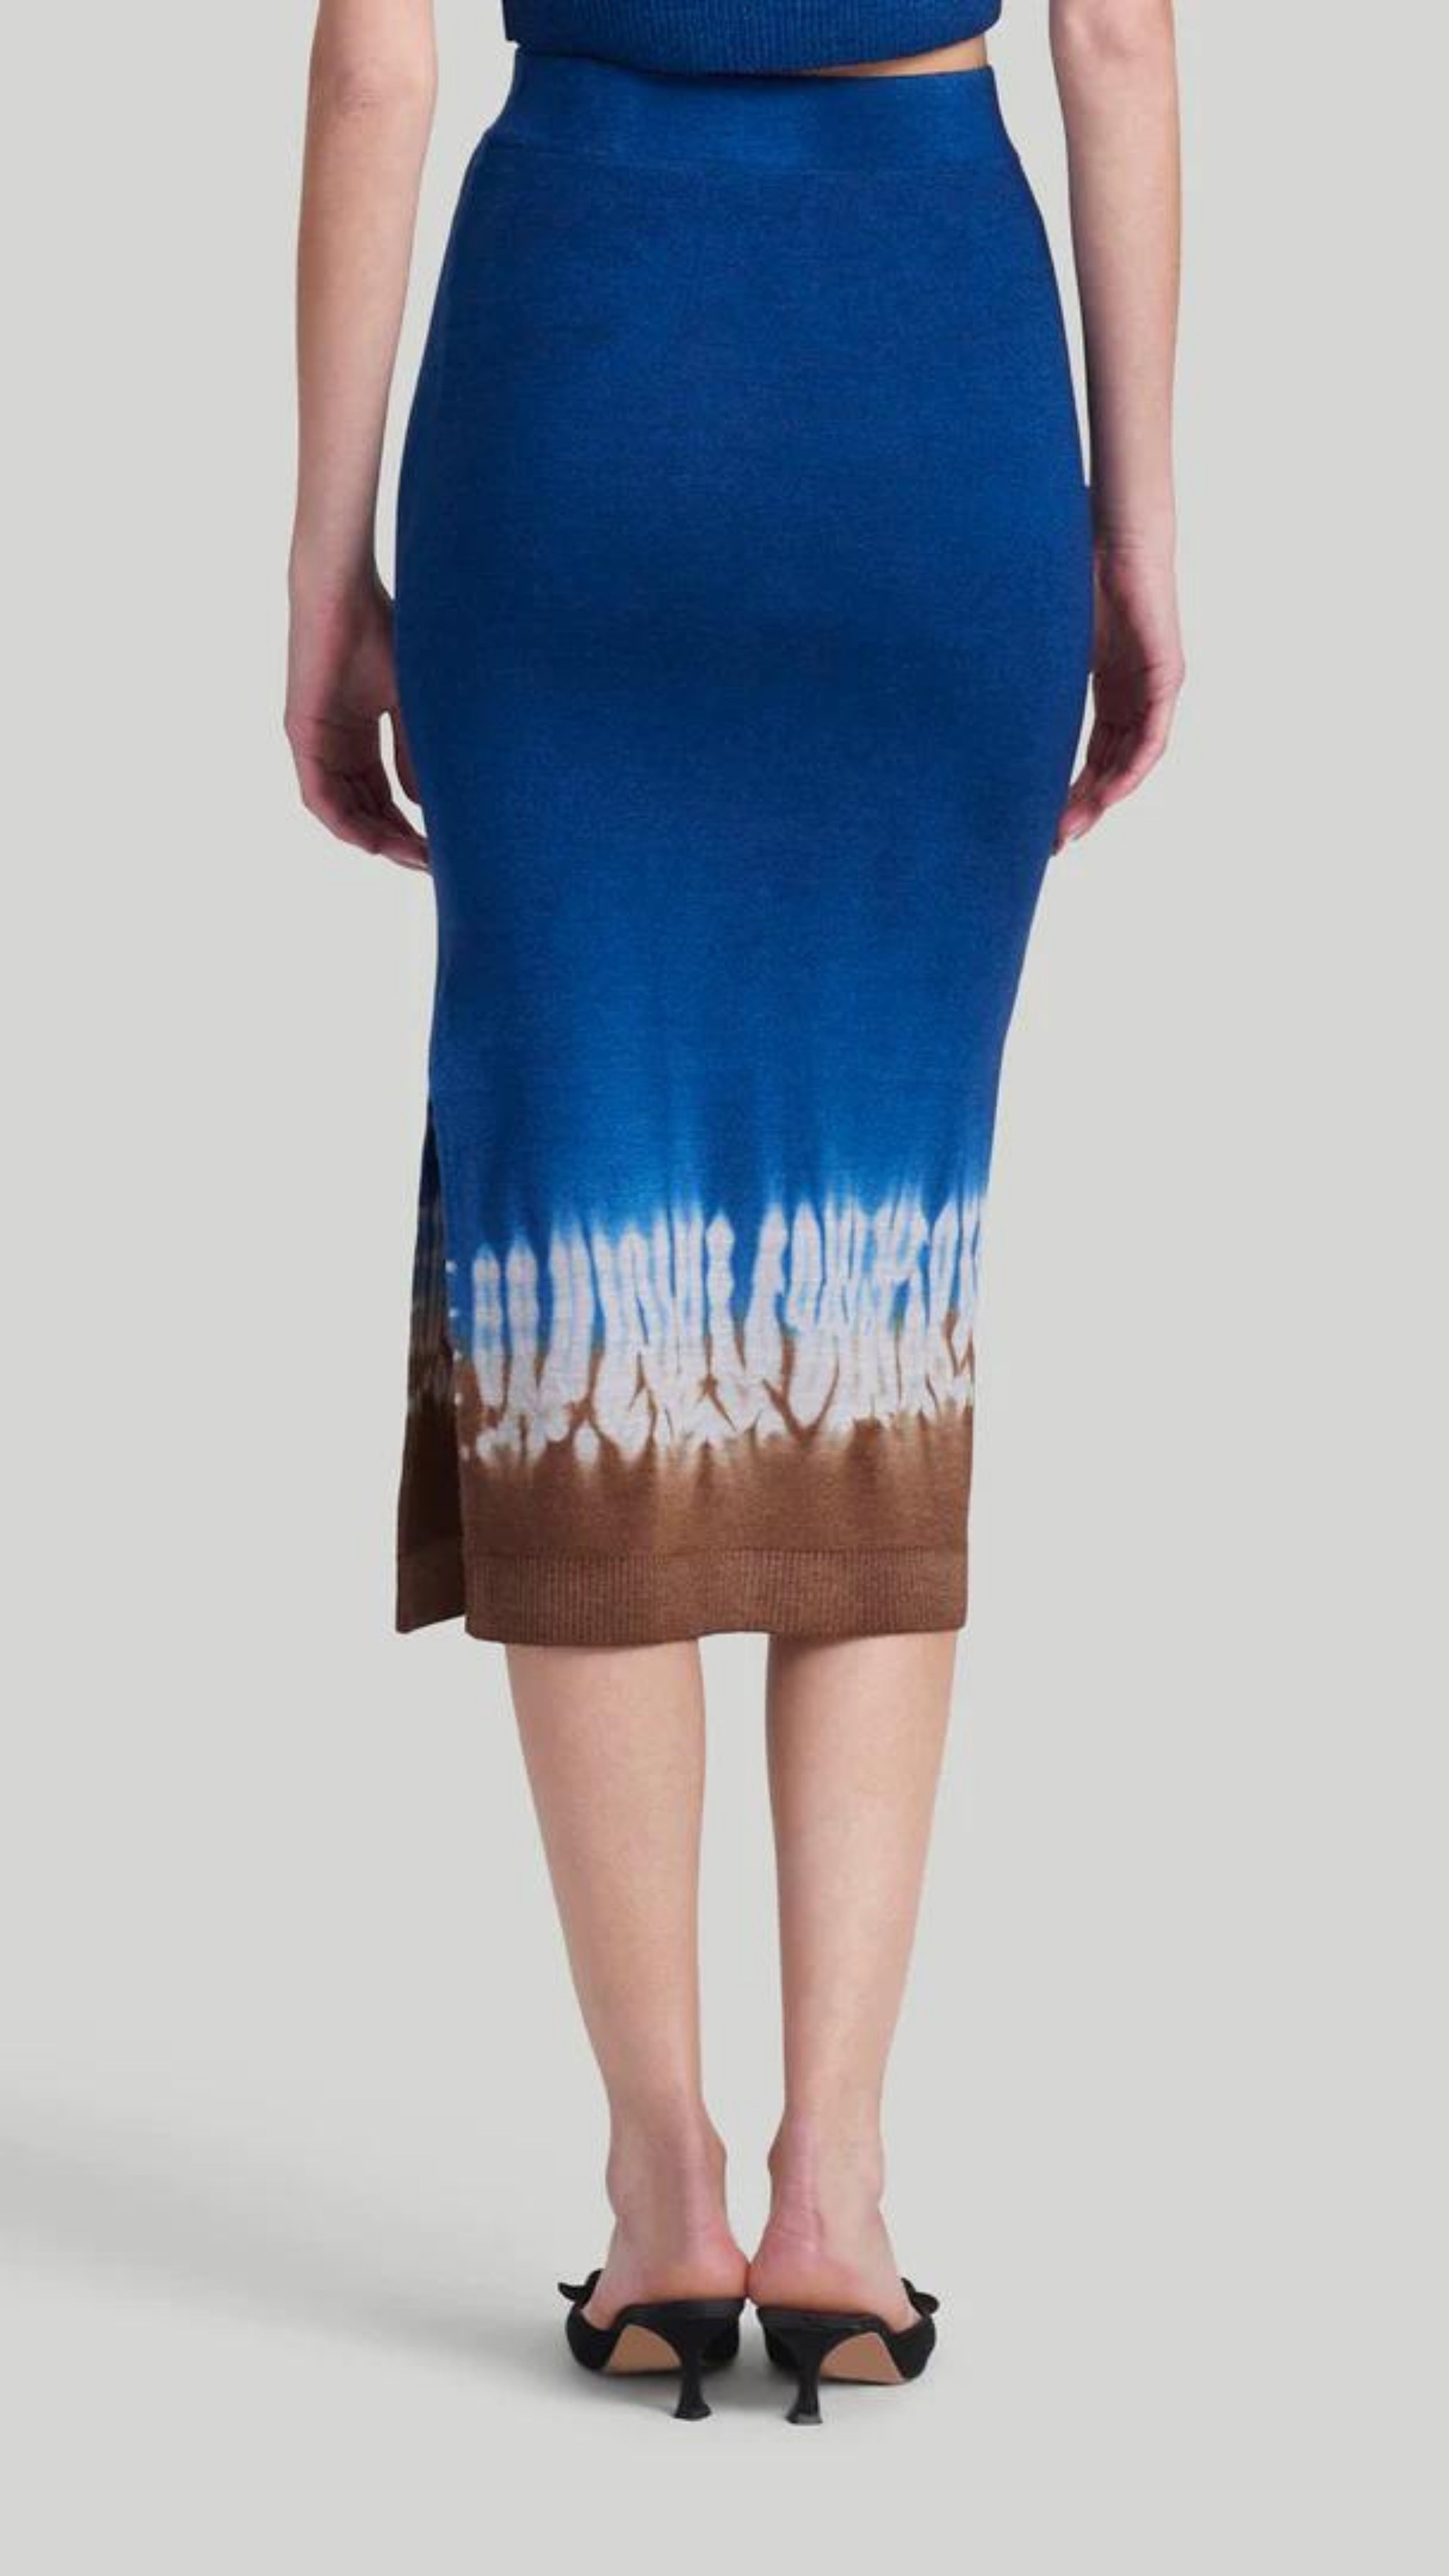 Altuzarra 'Morse' skirt, featuring Altuzarra's iconic Shibori tie-dye technique in brown, white, and blue. Made from 100% Superfine Merino 130's wool, this high-rise pencil silhouette midi length skirt. Shown on model facing back.